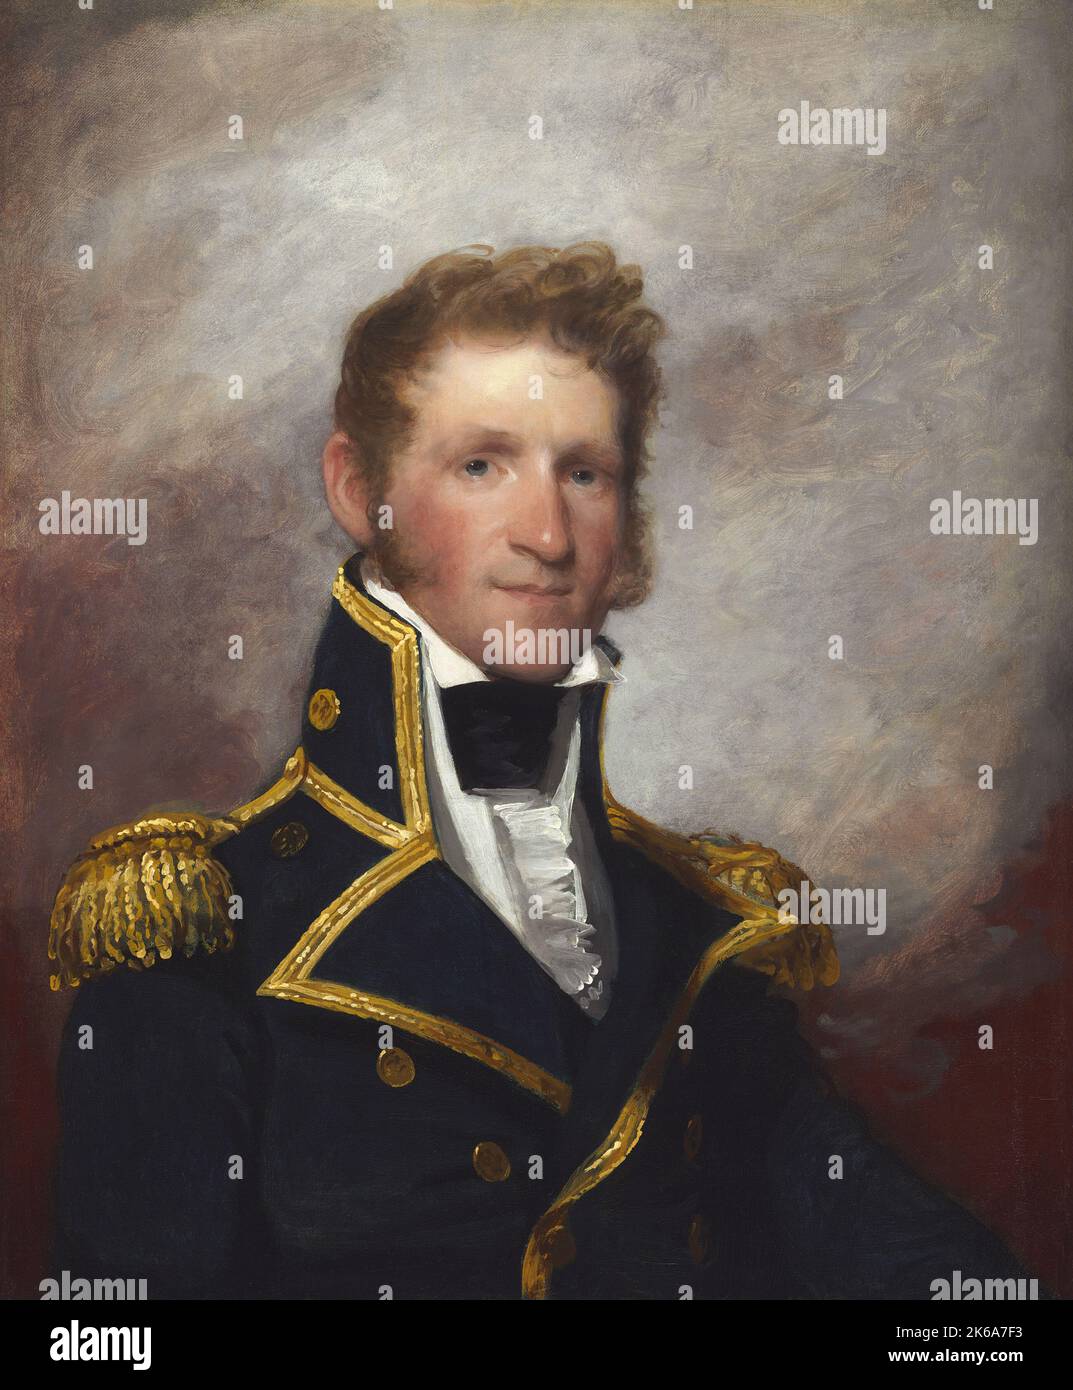 19th century painting of Commodore Thomas Macdonough, an early 19th century naval officer. Stock Photo